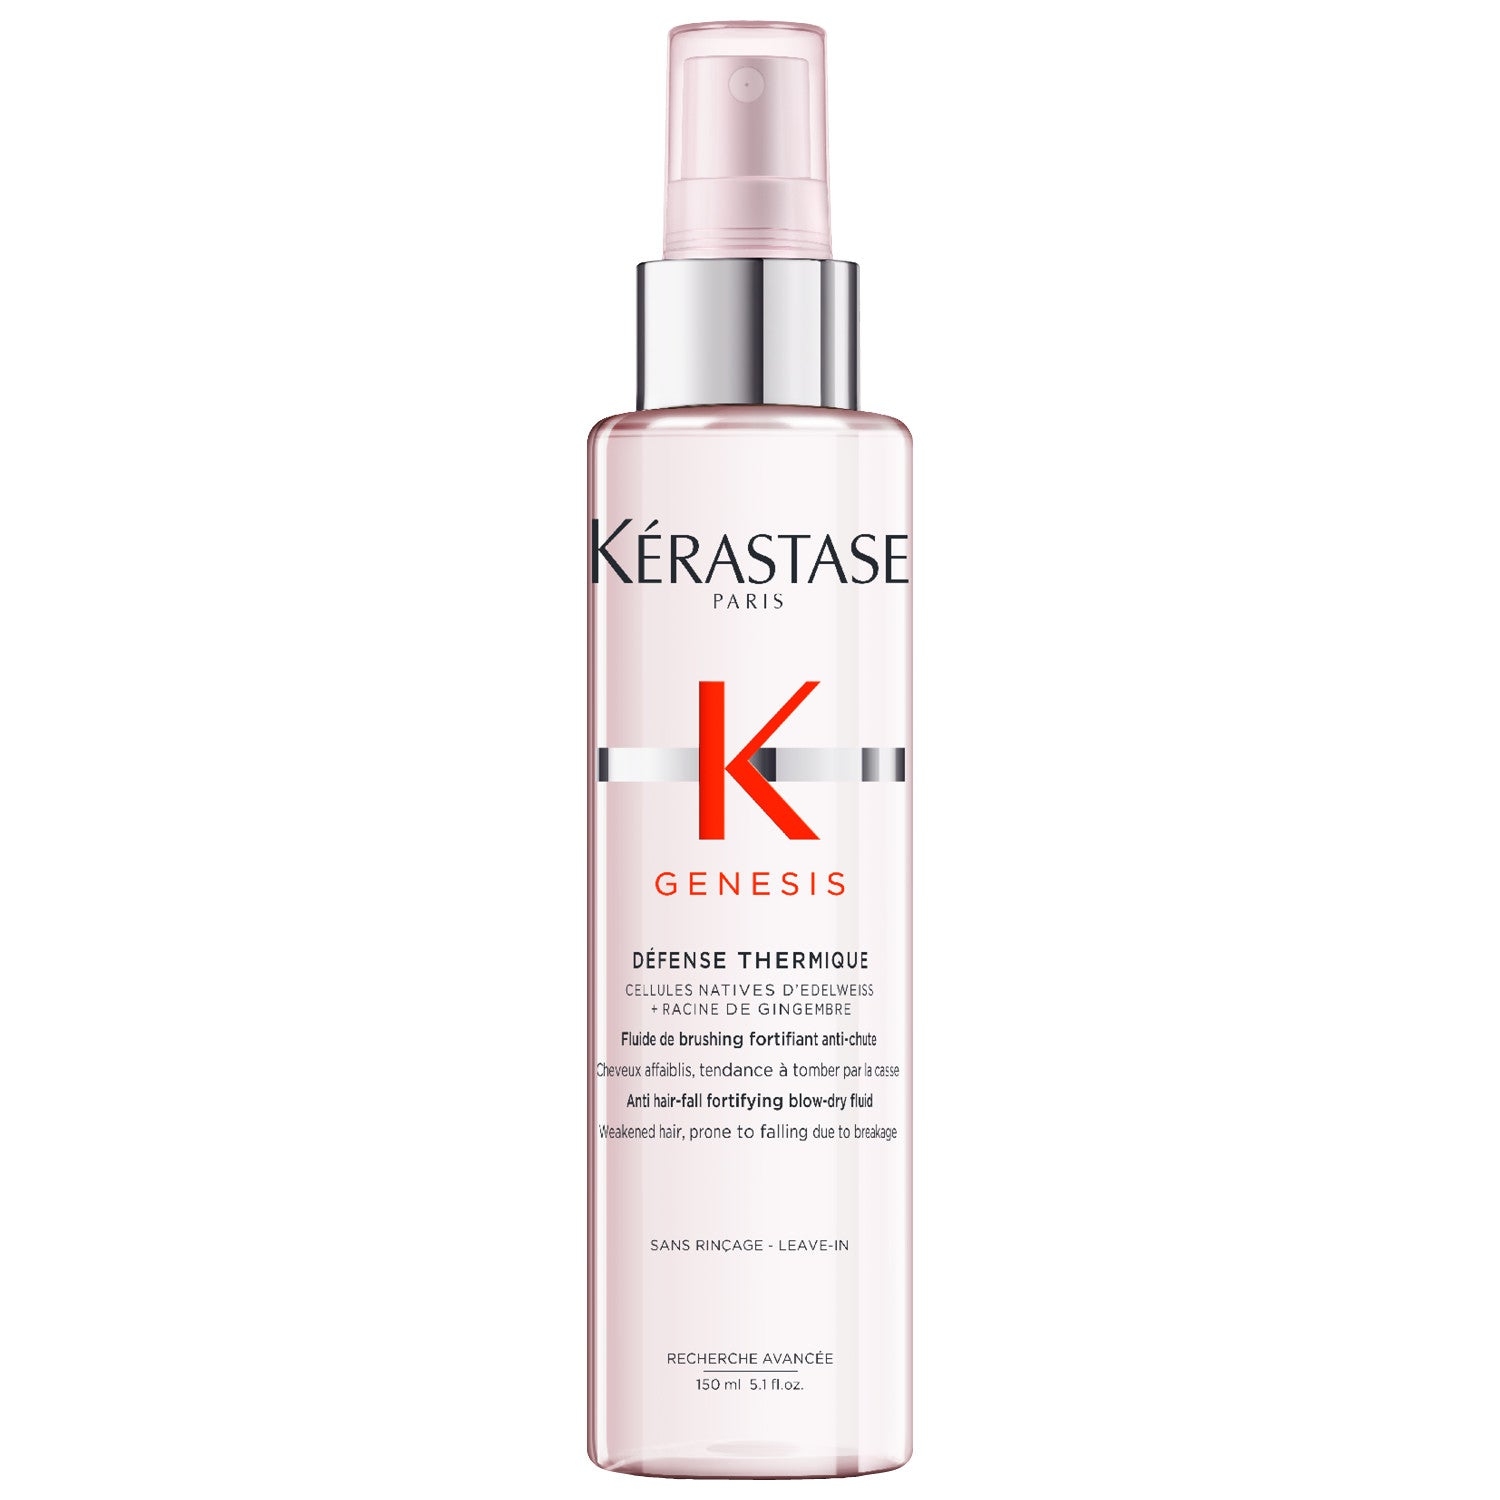 kerastase genesis trio for thick to dry hair donna